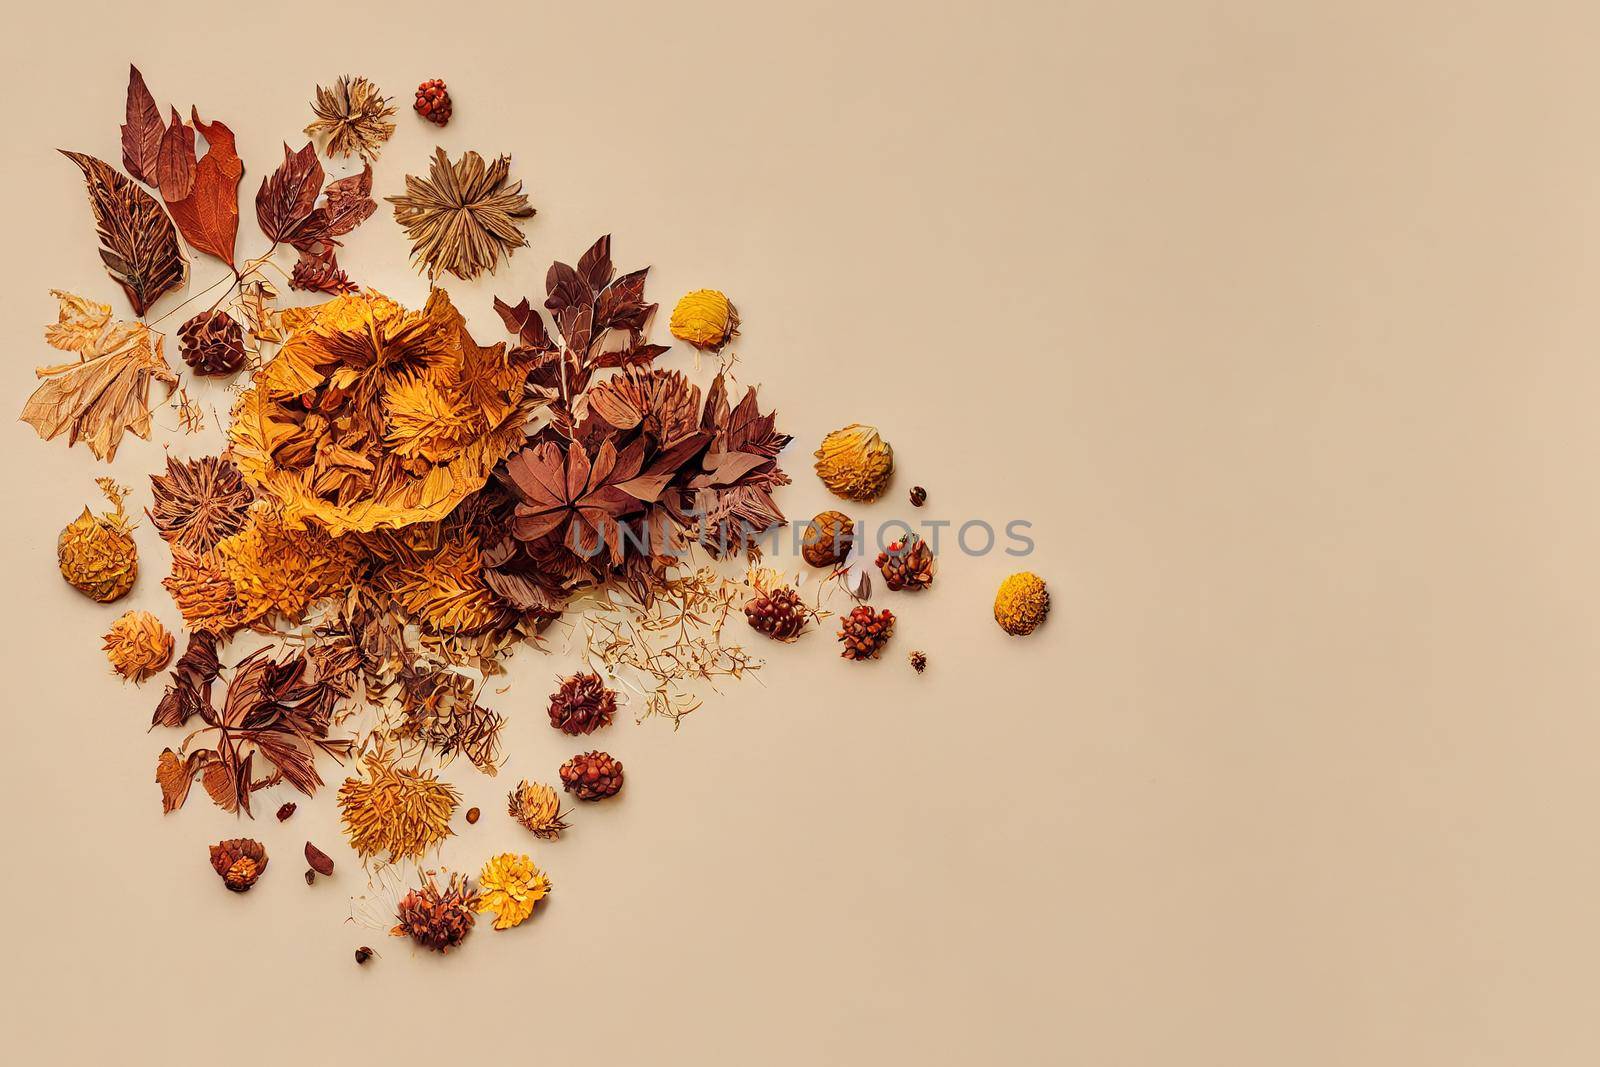 Autumn composition Pattern made of dried flowers, eucalyptus leaves, berries on beige background Autumn, fall, thanksgiving day concept Flat lay, top view, copy space , anime style